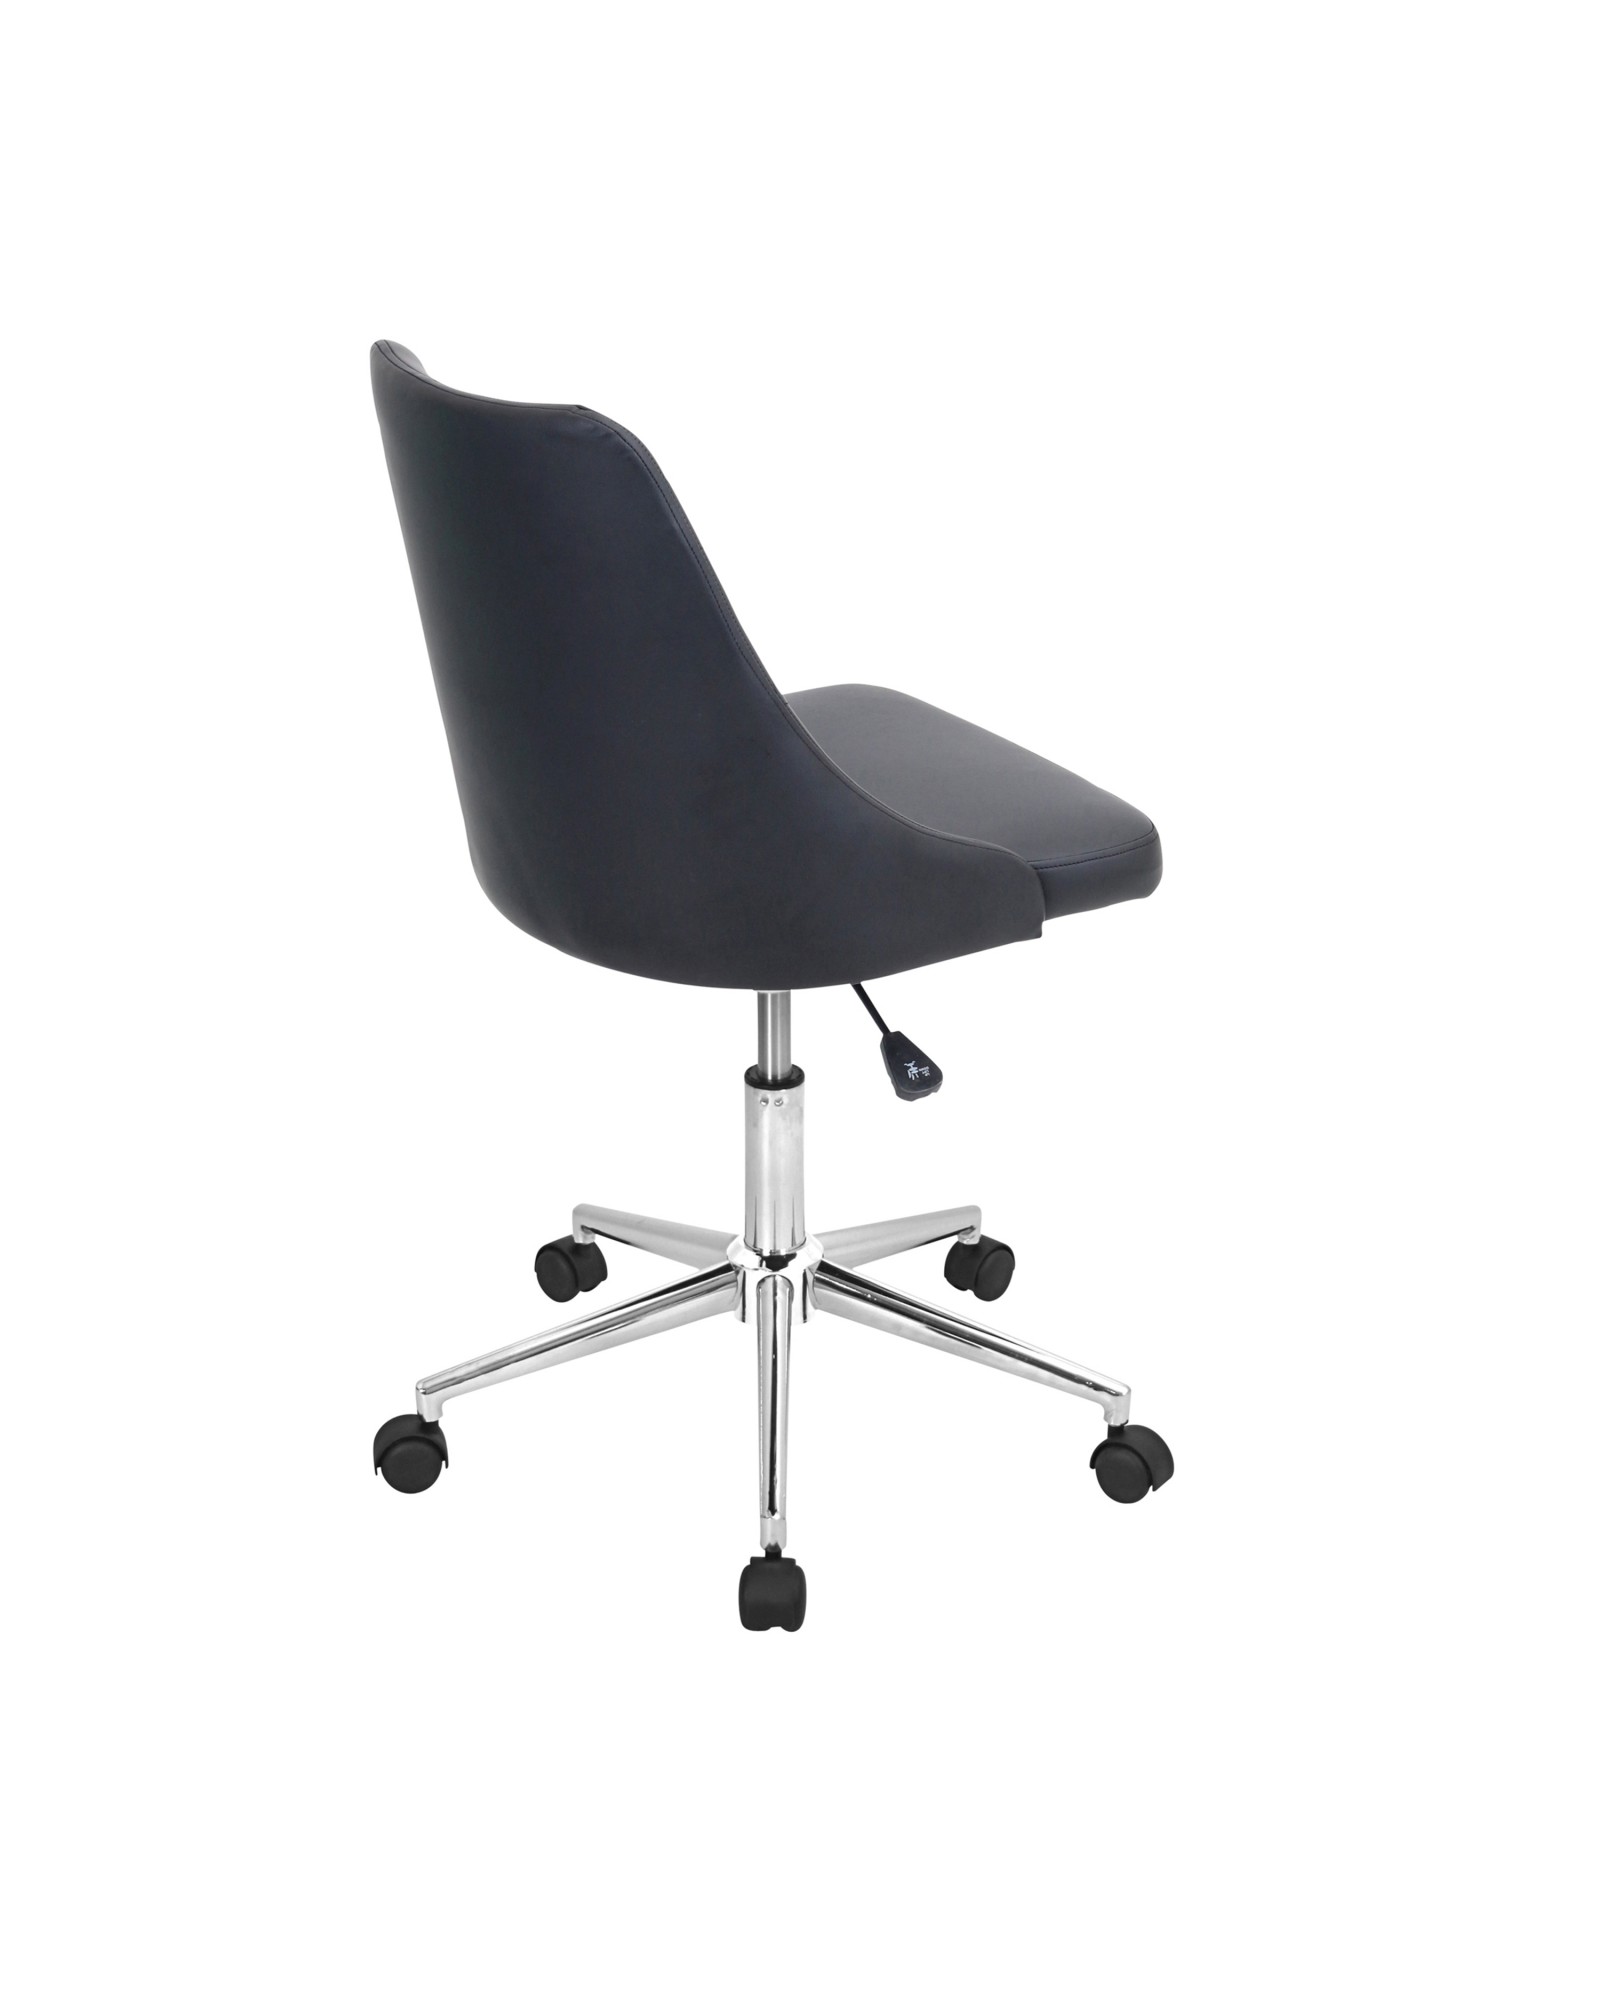 Marche Contemporary Adjustable Office Chair with Swivel in Black Faux Leather